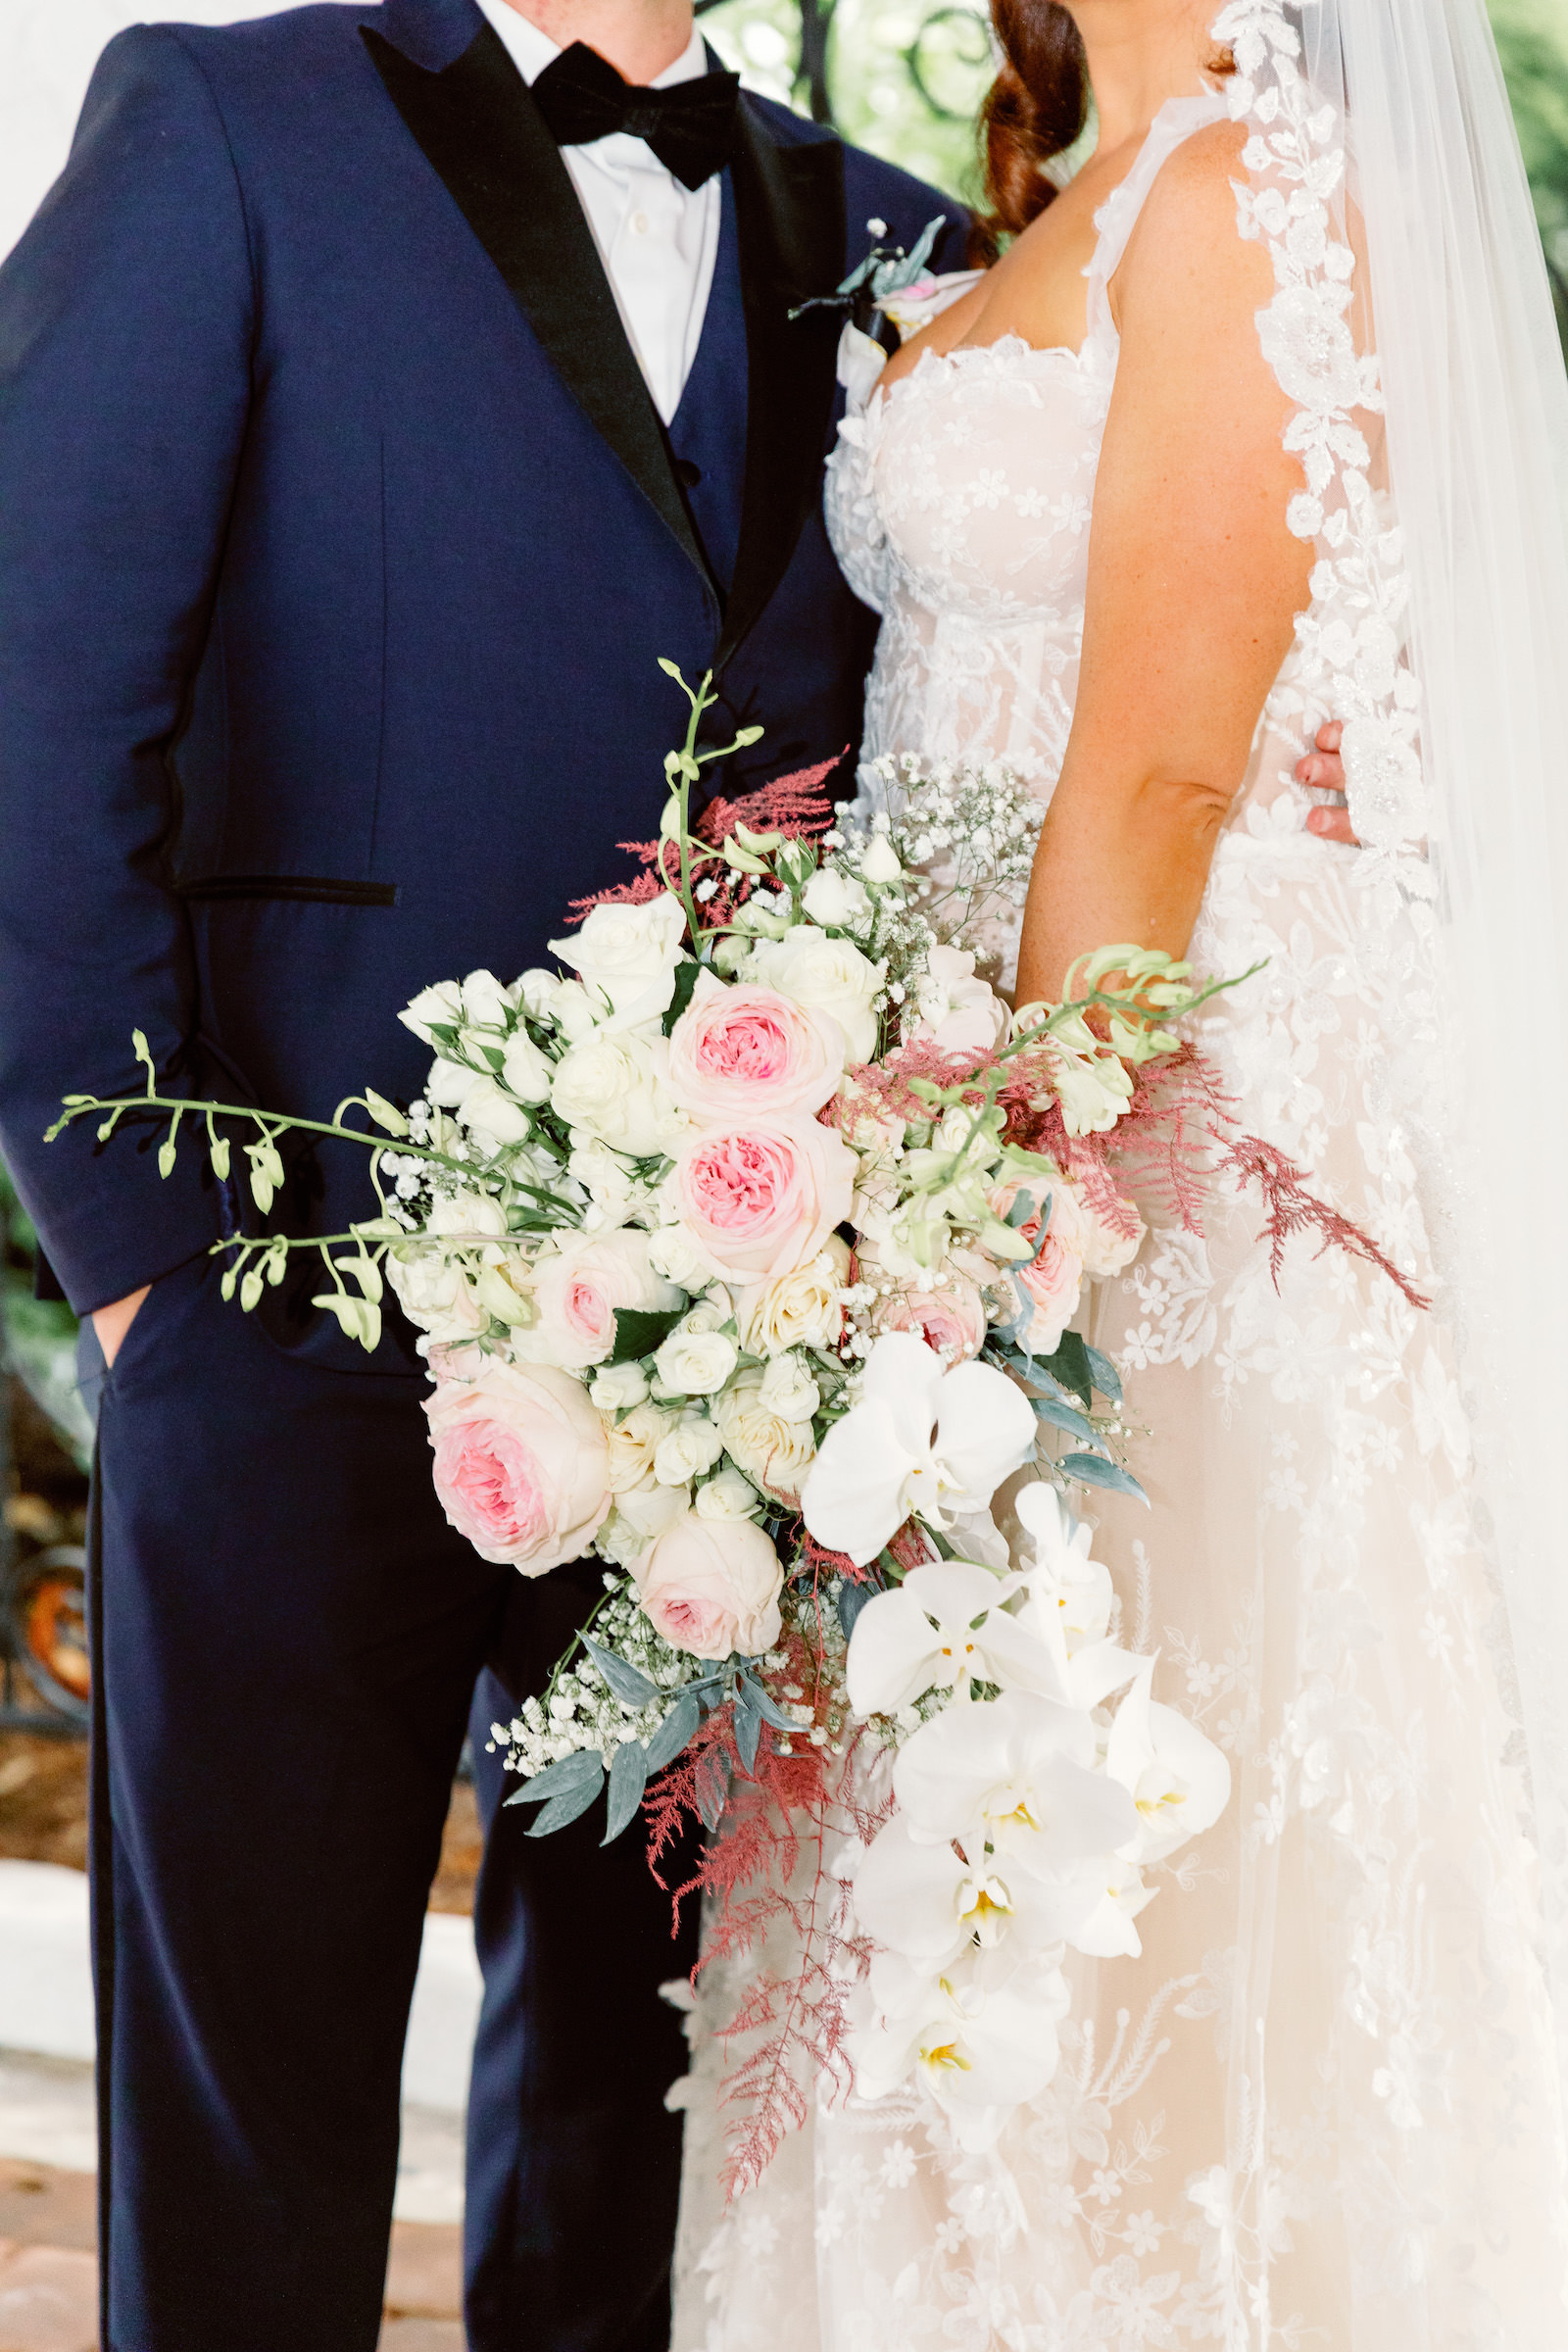 Fairytale Red and Pink Private Residence Wedding, Bride Holding Lush Romantic White Orchid, Pink Roses and Greenery Floral Bouquet | Tampa Bay Wedding Photographer Dewitt for Love | Wedding Florist Lemon Drops